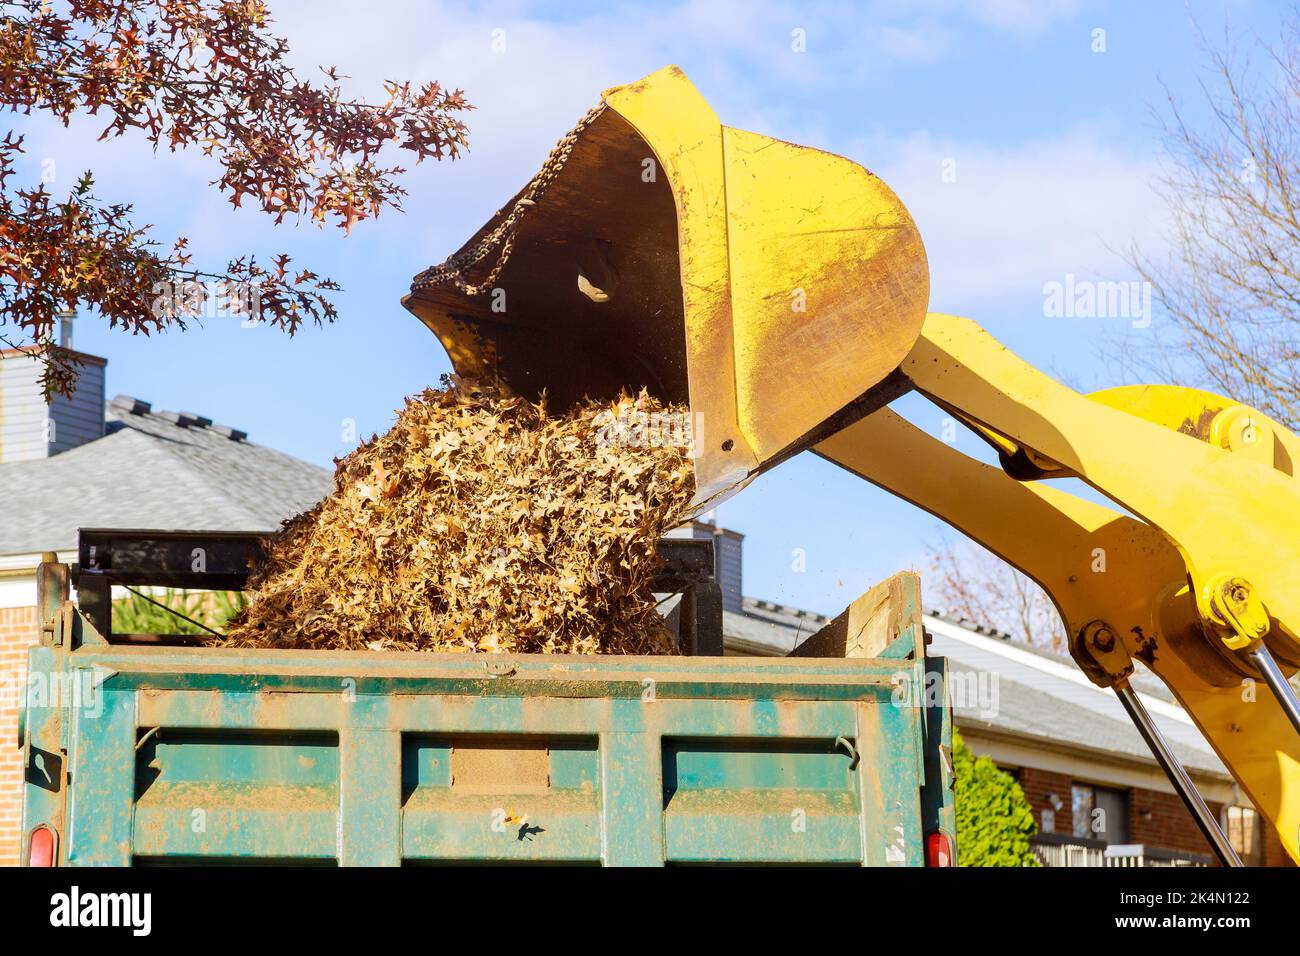 It is a routine practice in autumn when municipal workers remove fallen leaves using an excavator and a truck in the neighbourhood of homes Stock Photo